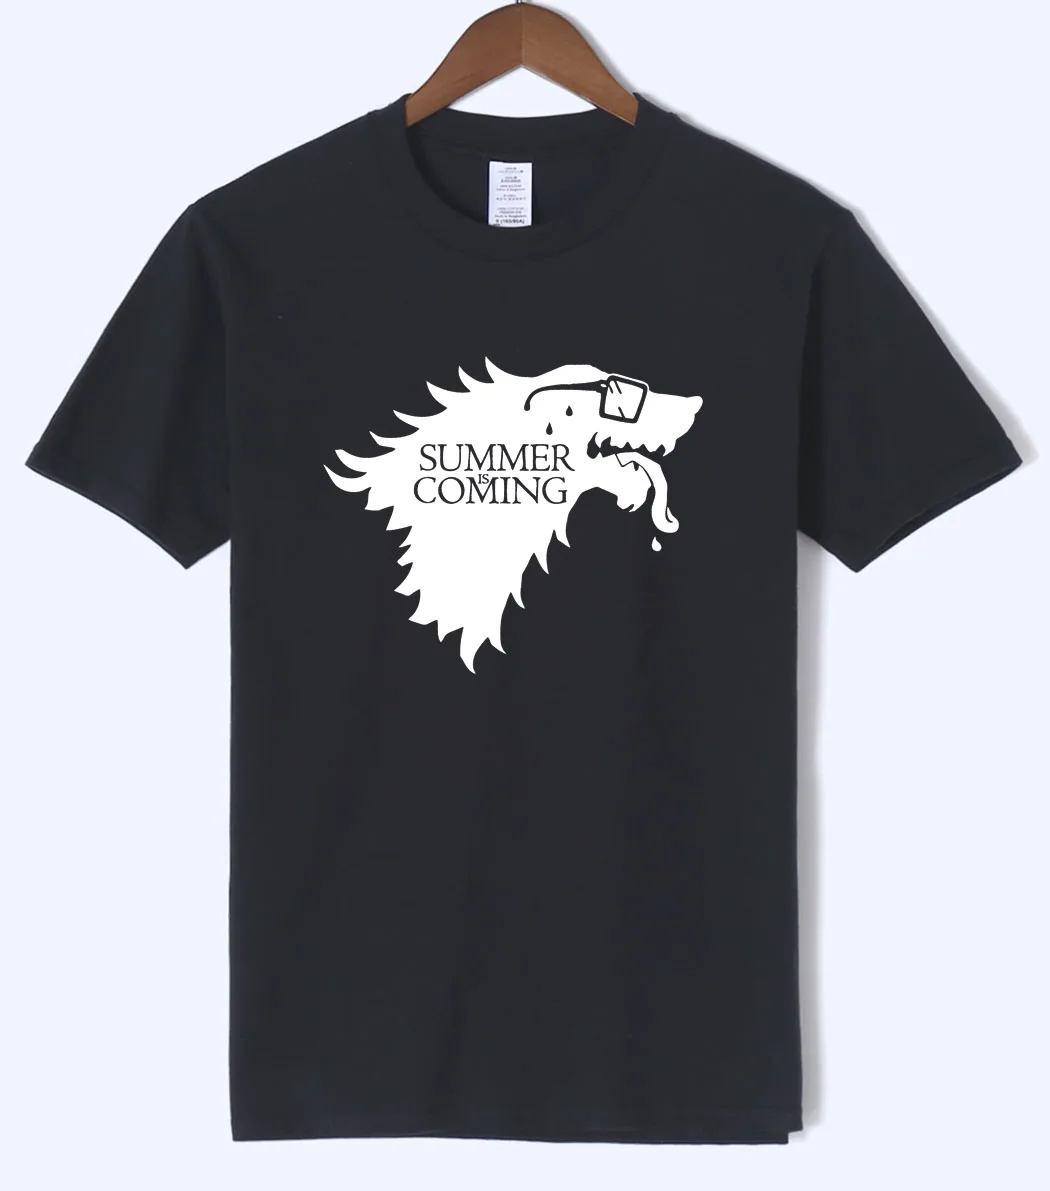 Zara online game of thrones t shirt summer is coming near